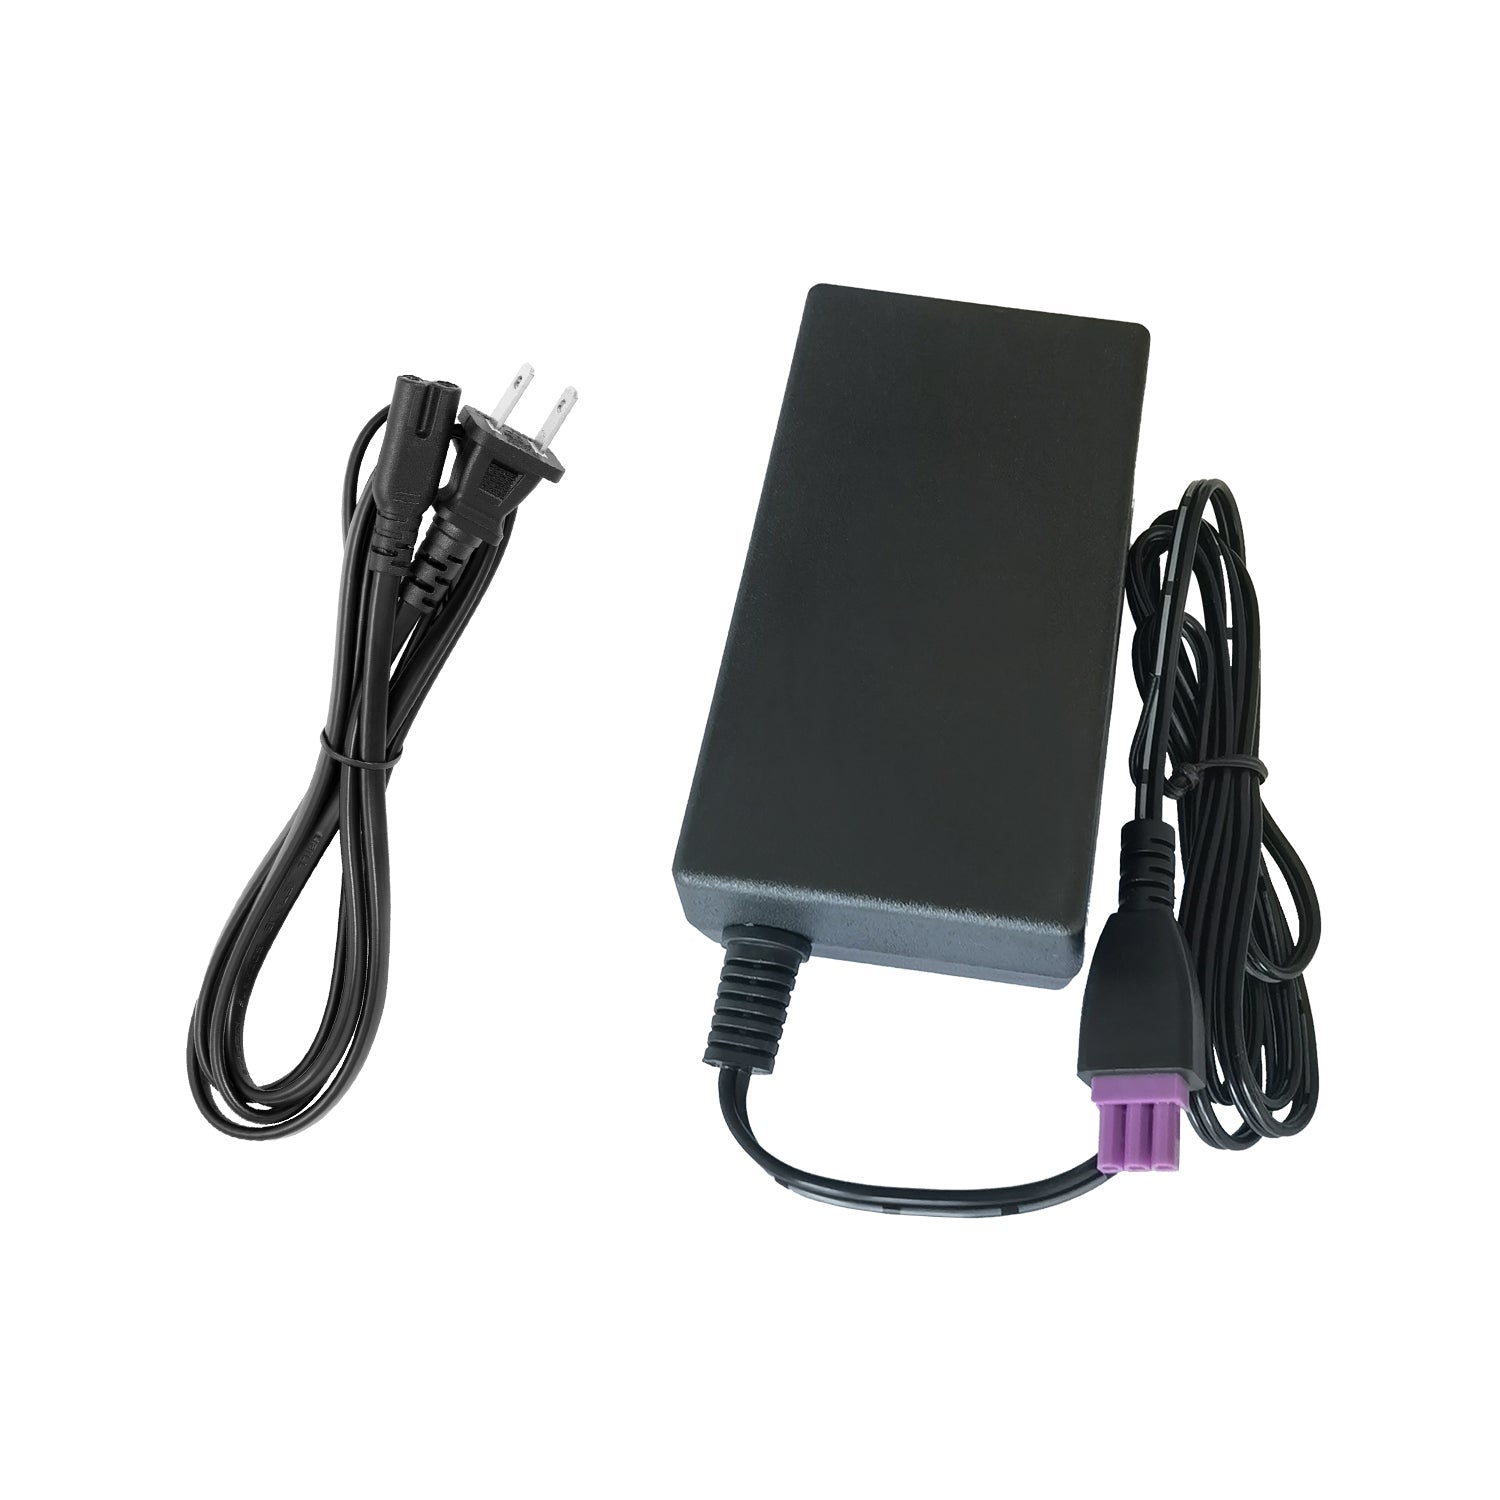 Power Adapter for HP Printer 0957-2230.